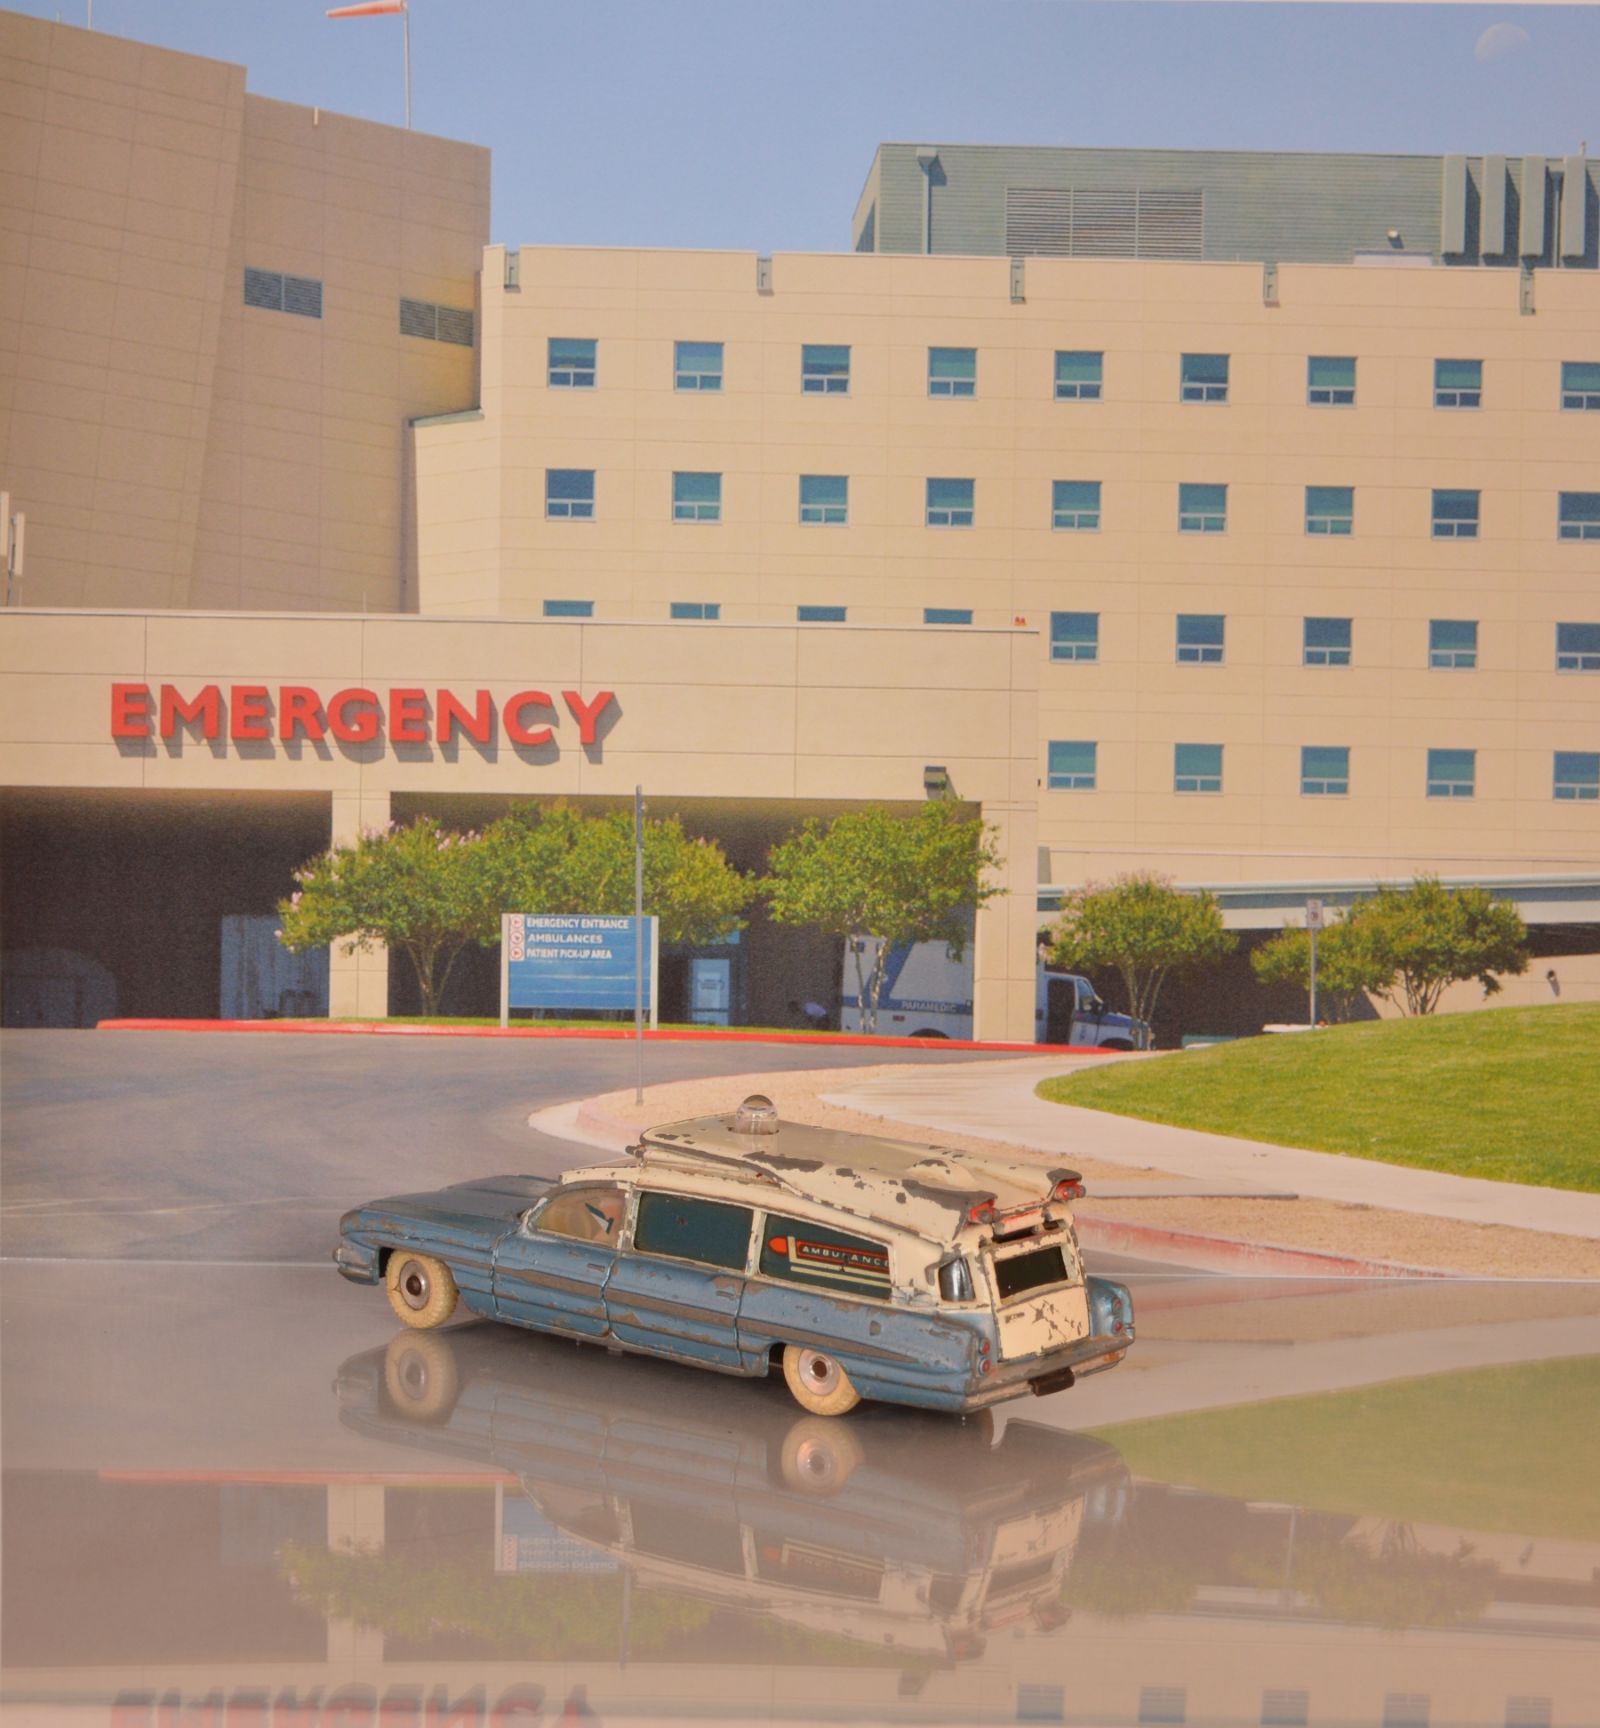 Illustration for article titled First Response Friday - Superior Criterion Ambulance